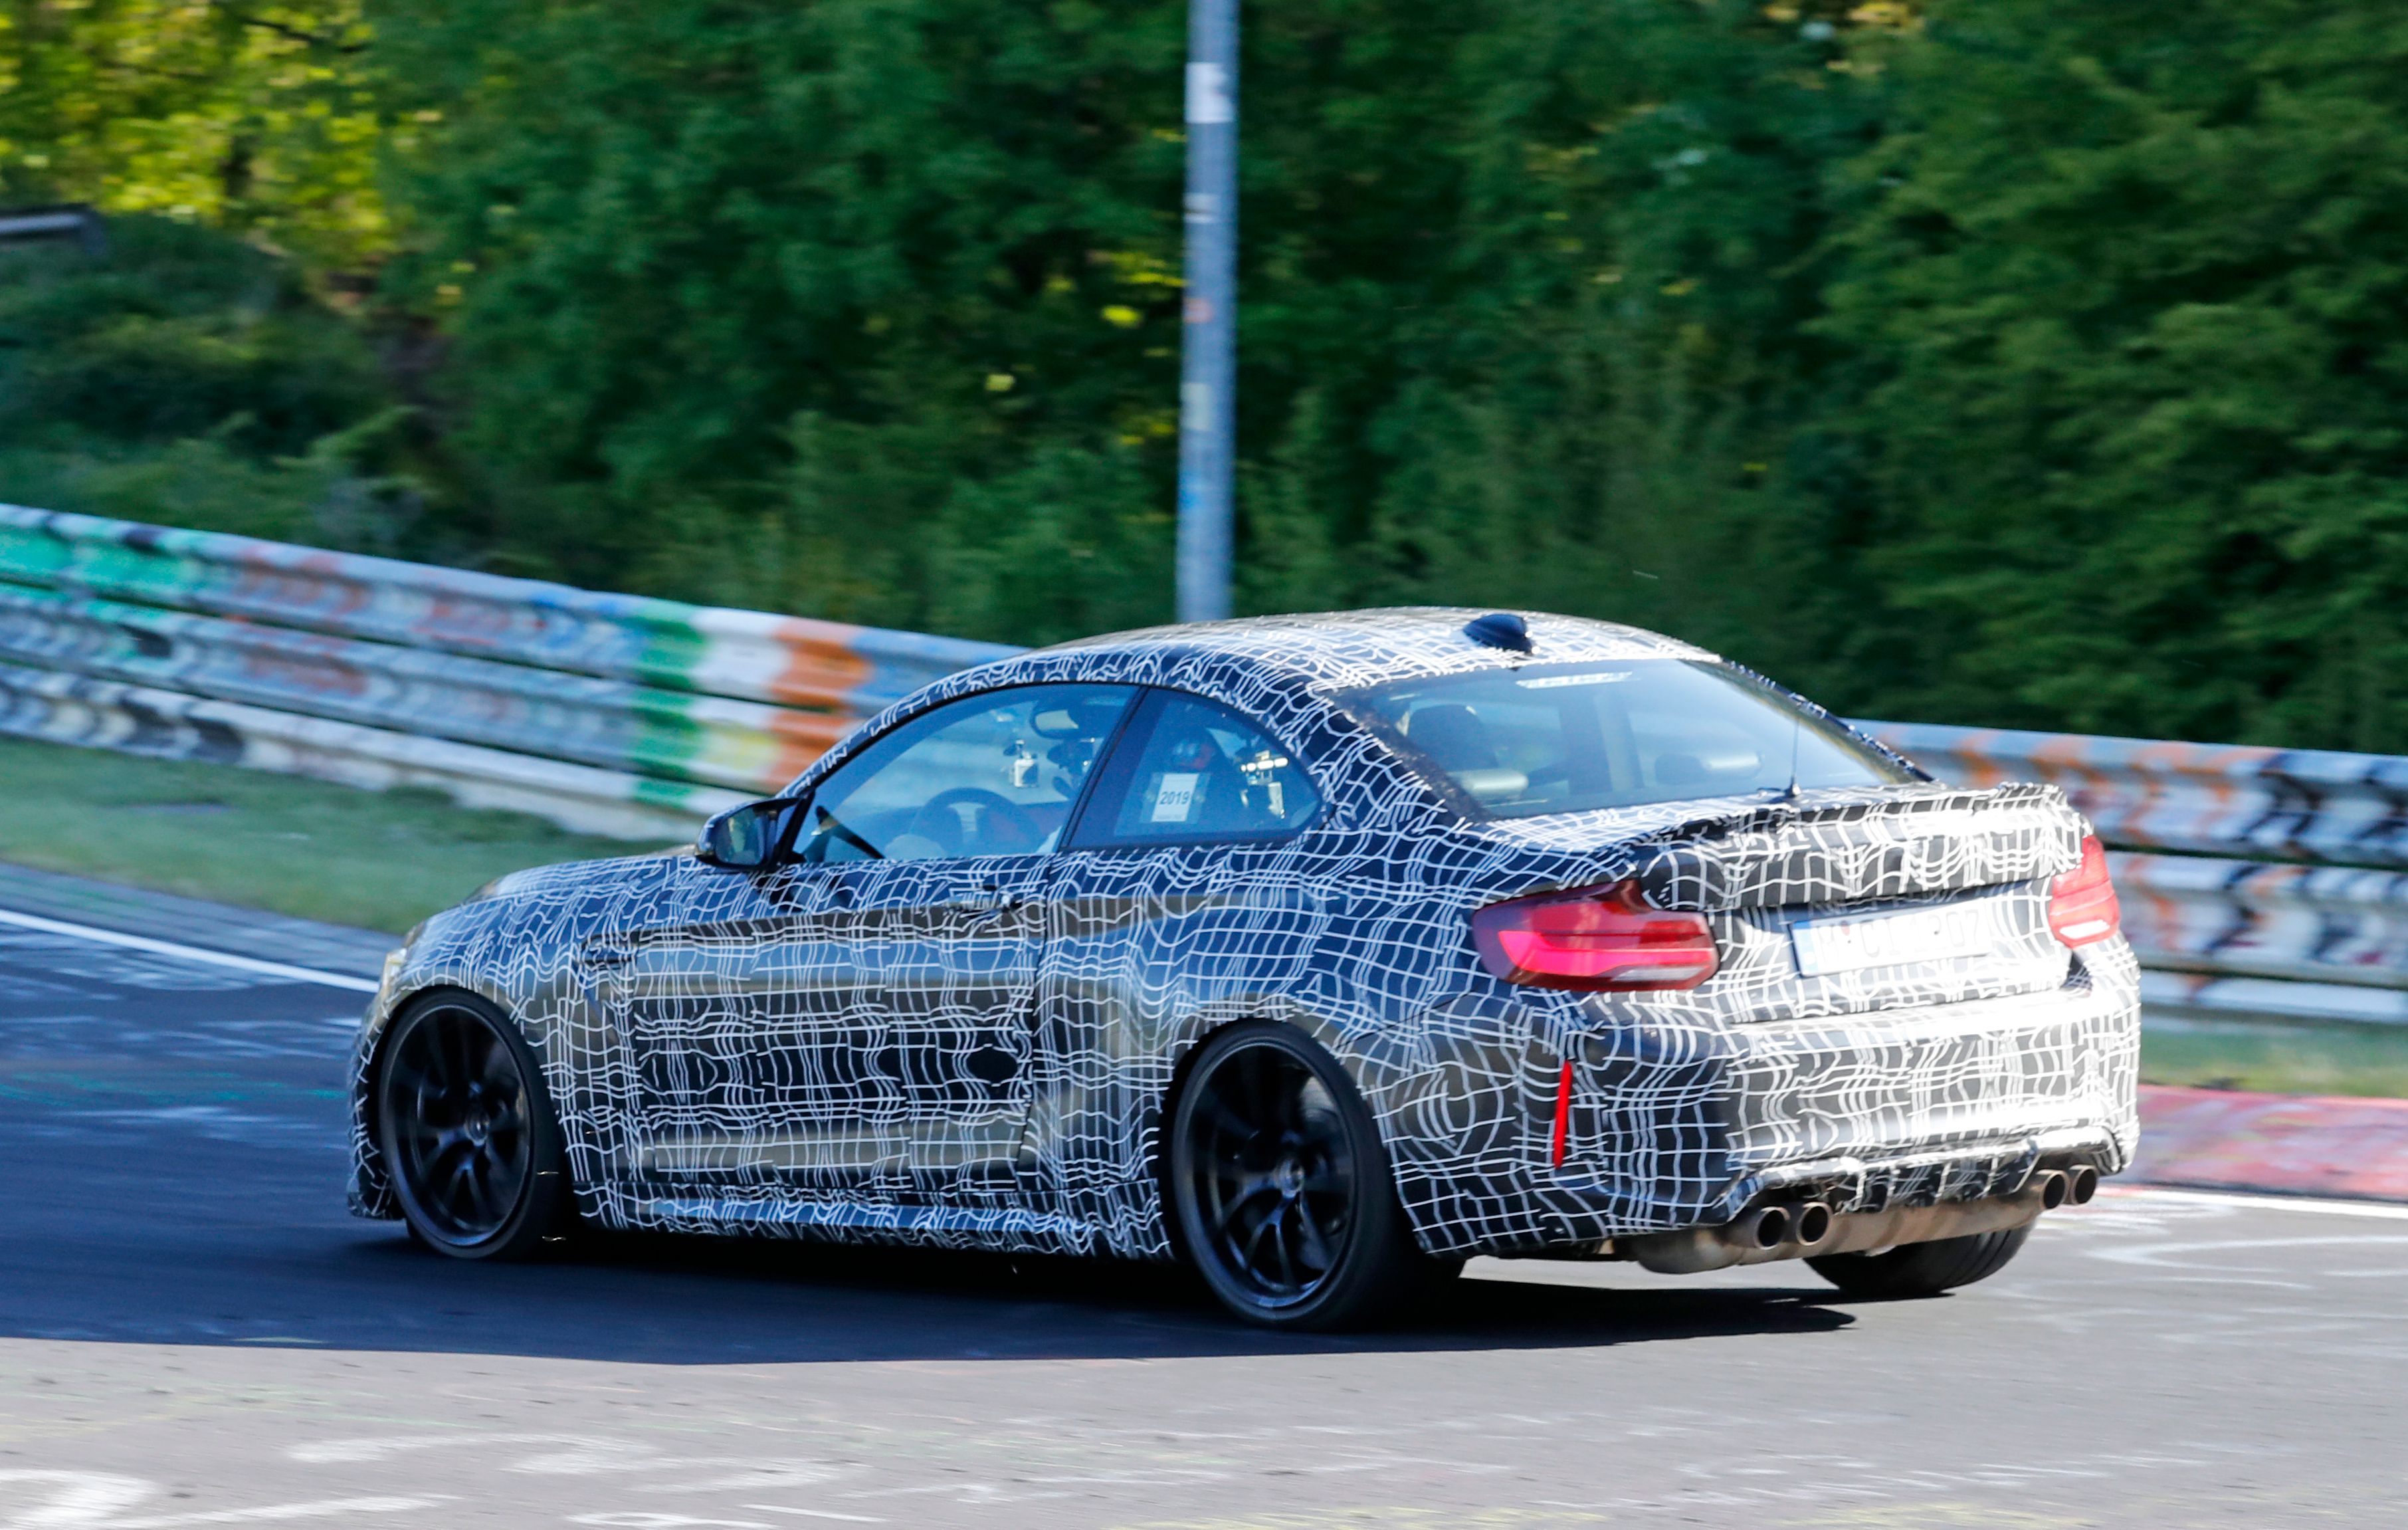 2019 We're Still Waiting for the BMW M2 CS But You Can Ride In IT...Kind Of